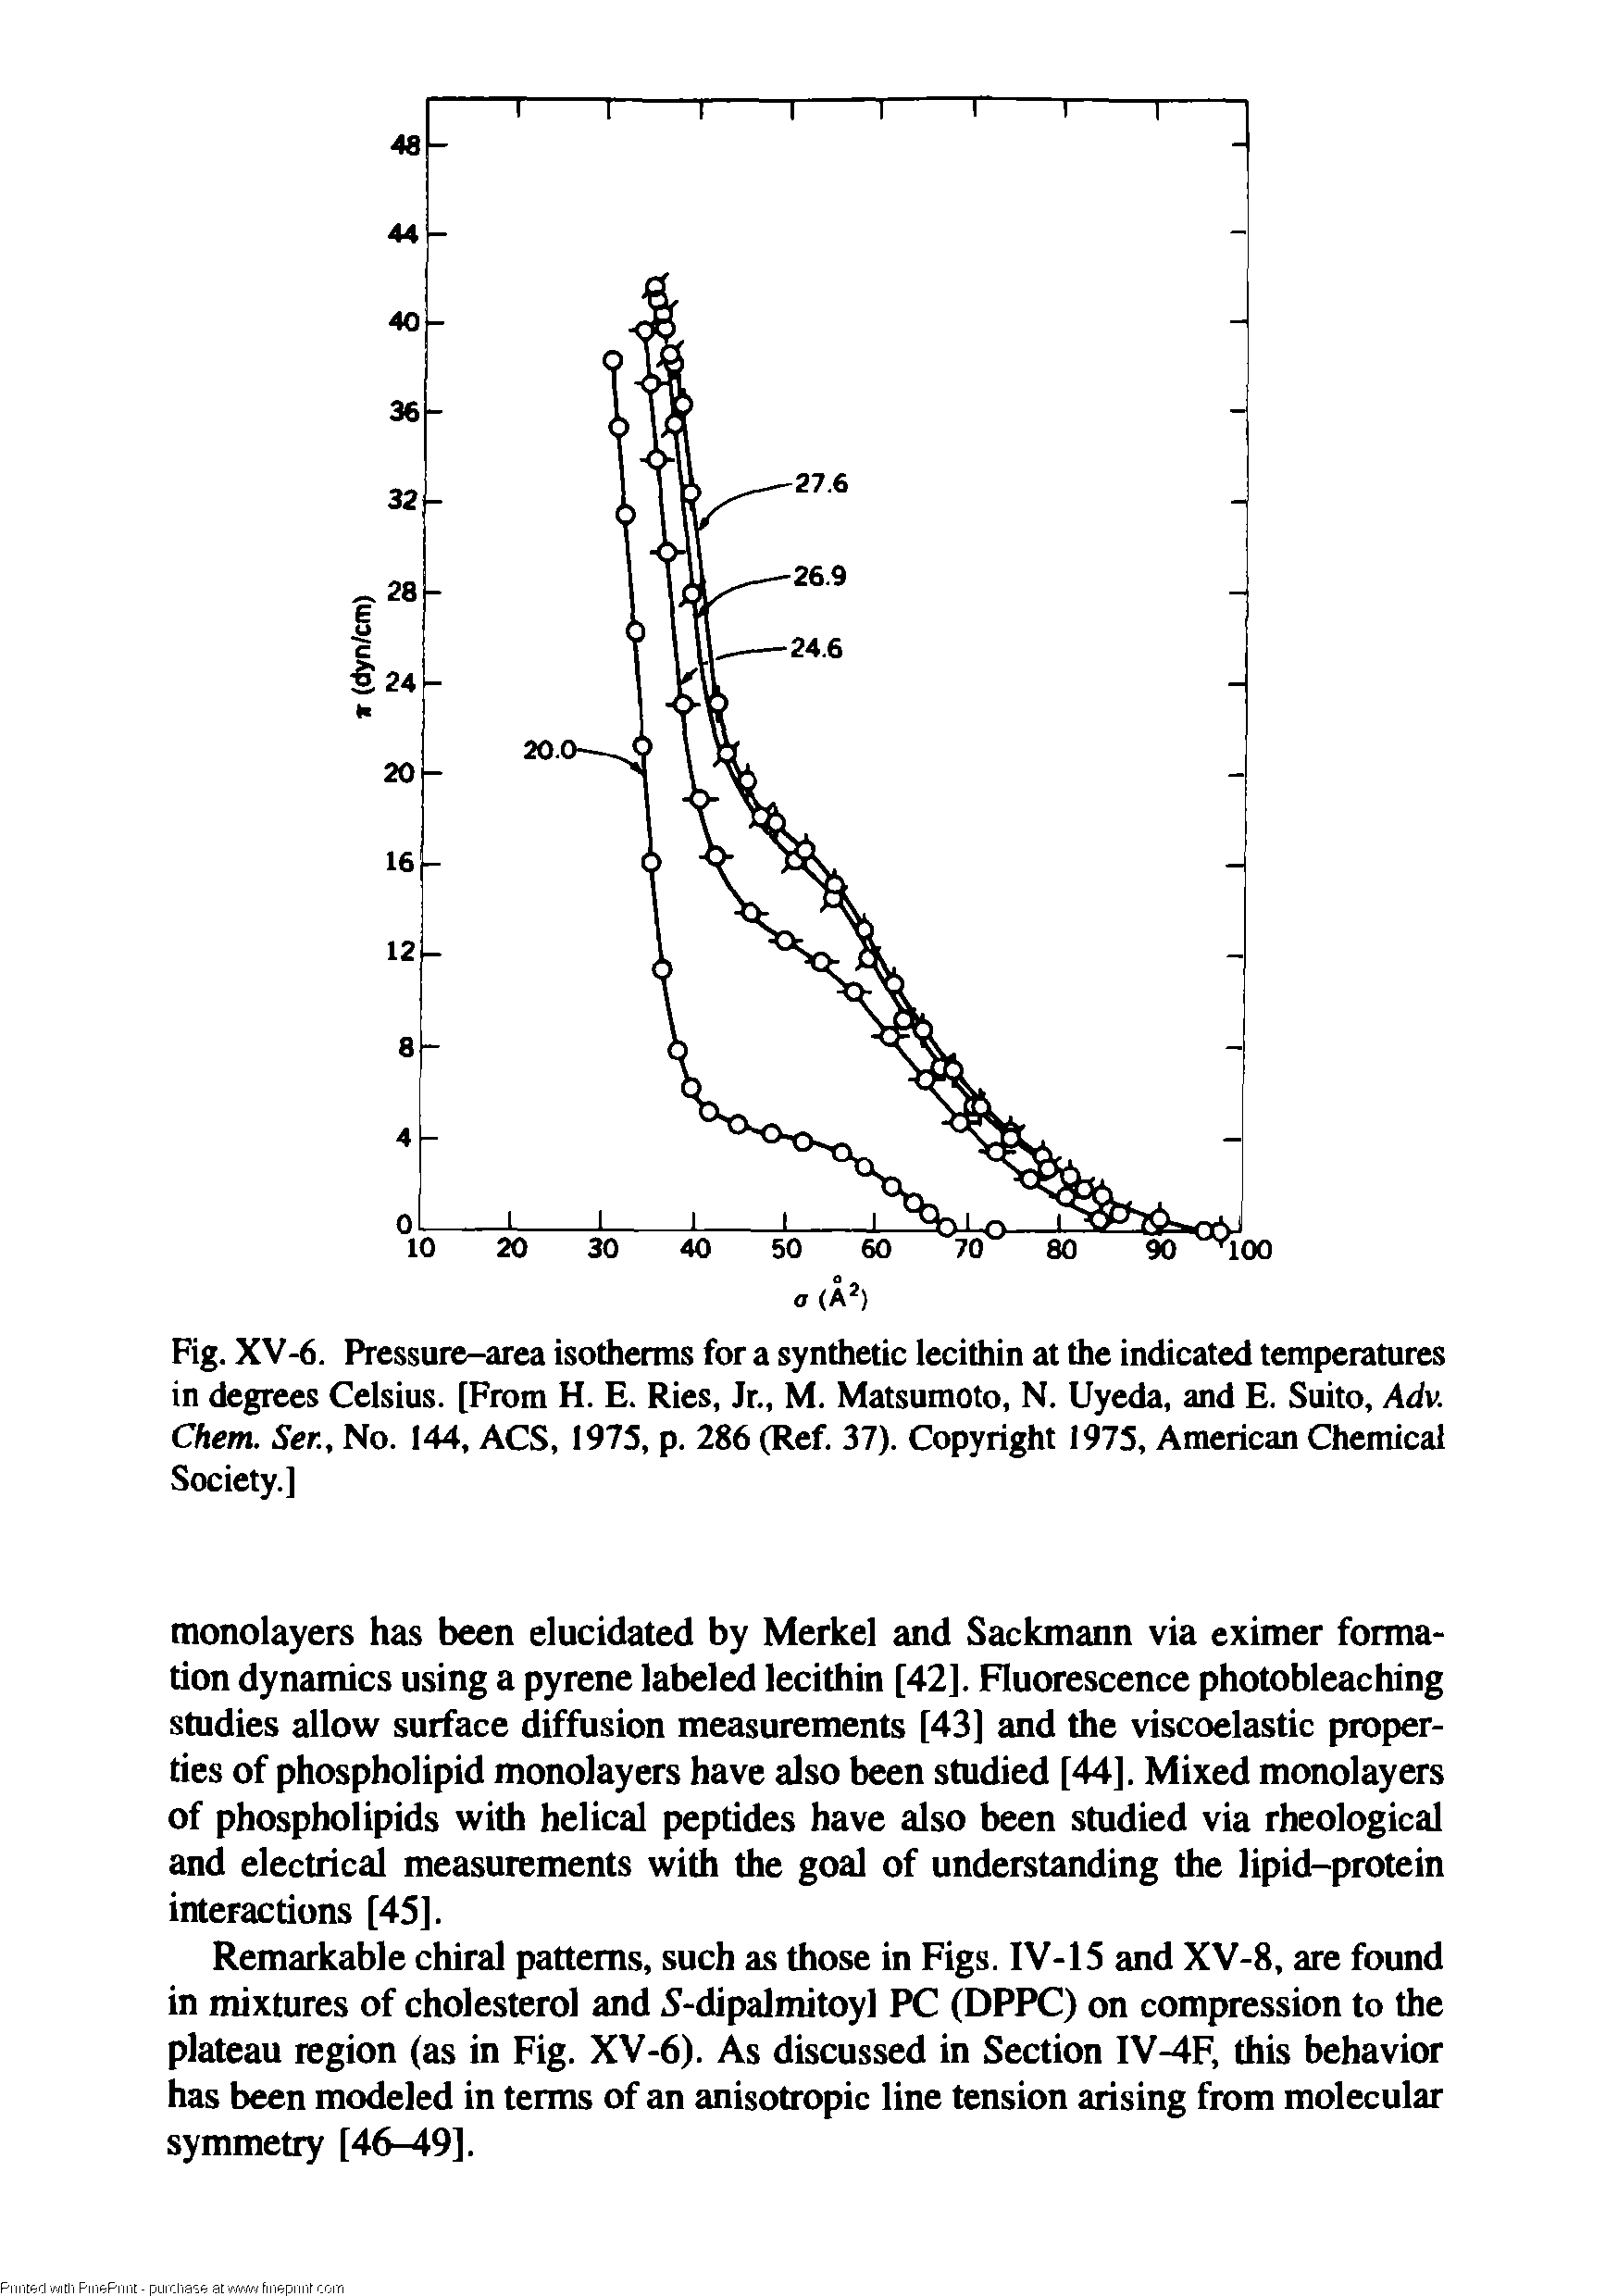 Fig. XV-6. Pressure-area isotherms for a synthetic lecithin at the indicated temperatures in degrees Celsius. [From H. E. Ries, Jr., M. Matsumoto, N. Uyeda, and E. Suito, Adv. Chem. Ser, No. 144, ACS, 1975, p. 286 (Ref. 37). Copyright 1975, American Chemical Society.]...